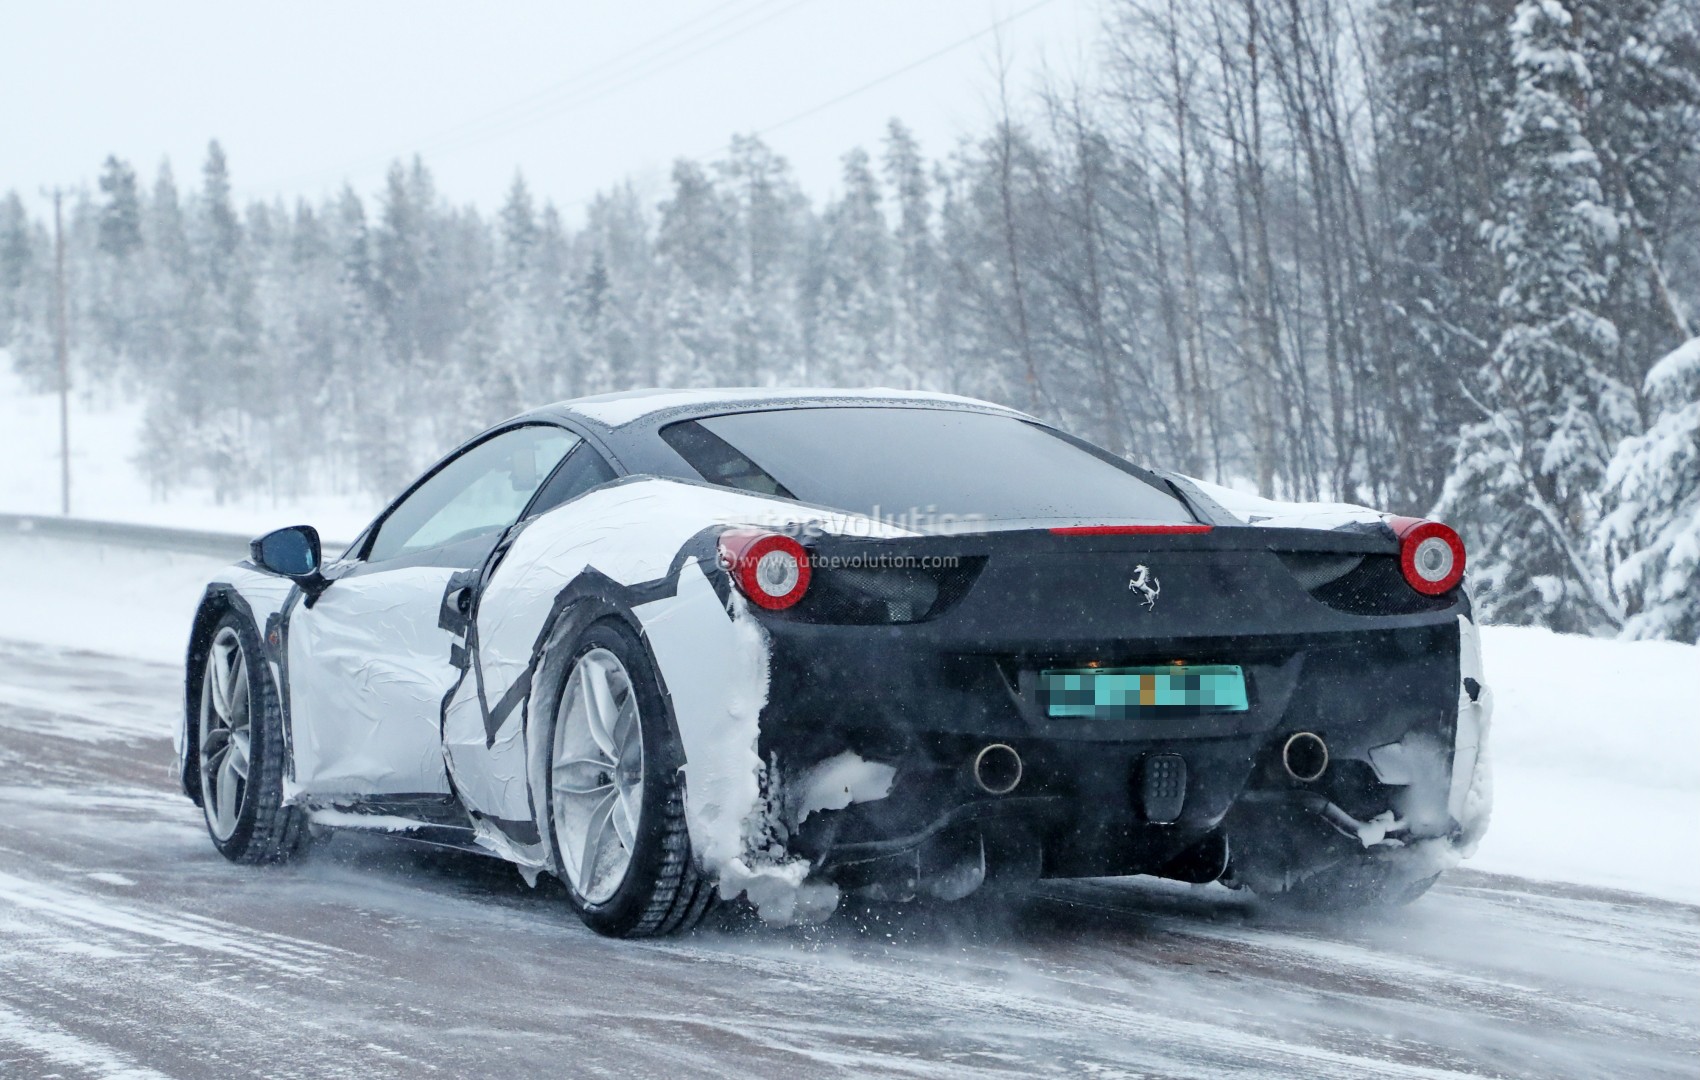 2019 - [Ferrari] Roma [F169] - Page 2 New-ferrari-dino-spied-testing-in-sweden-as-458-test-mule-with-v6-soundtrack_11